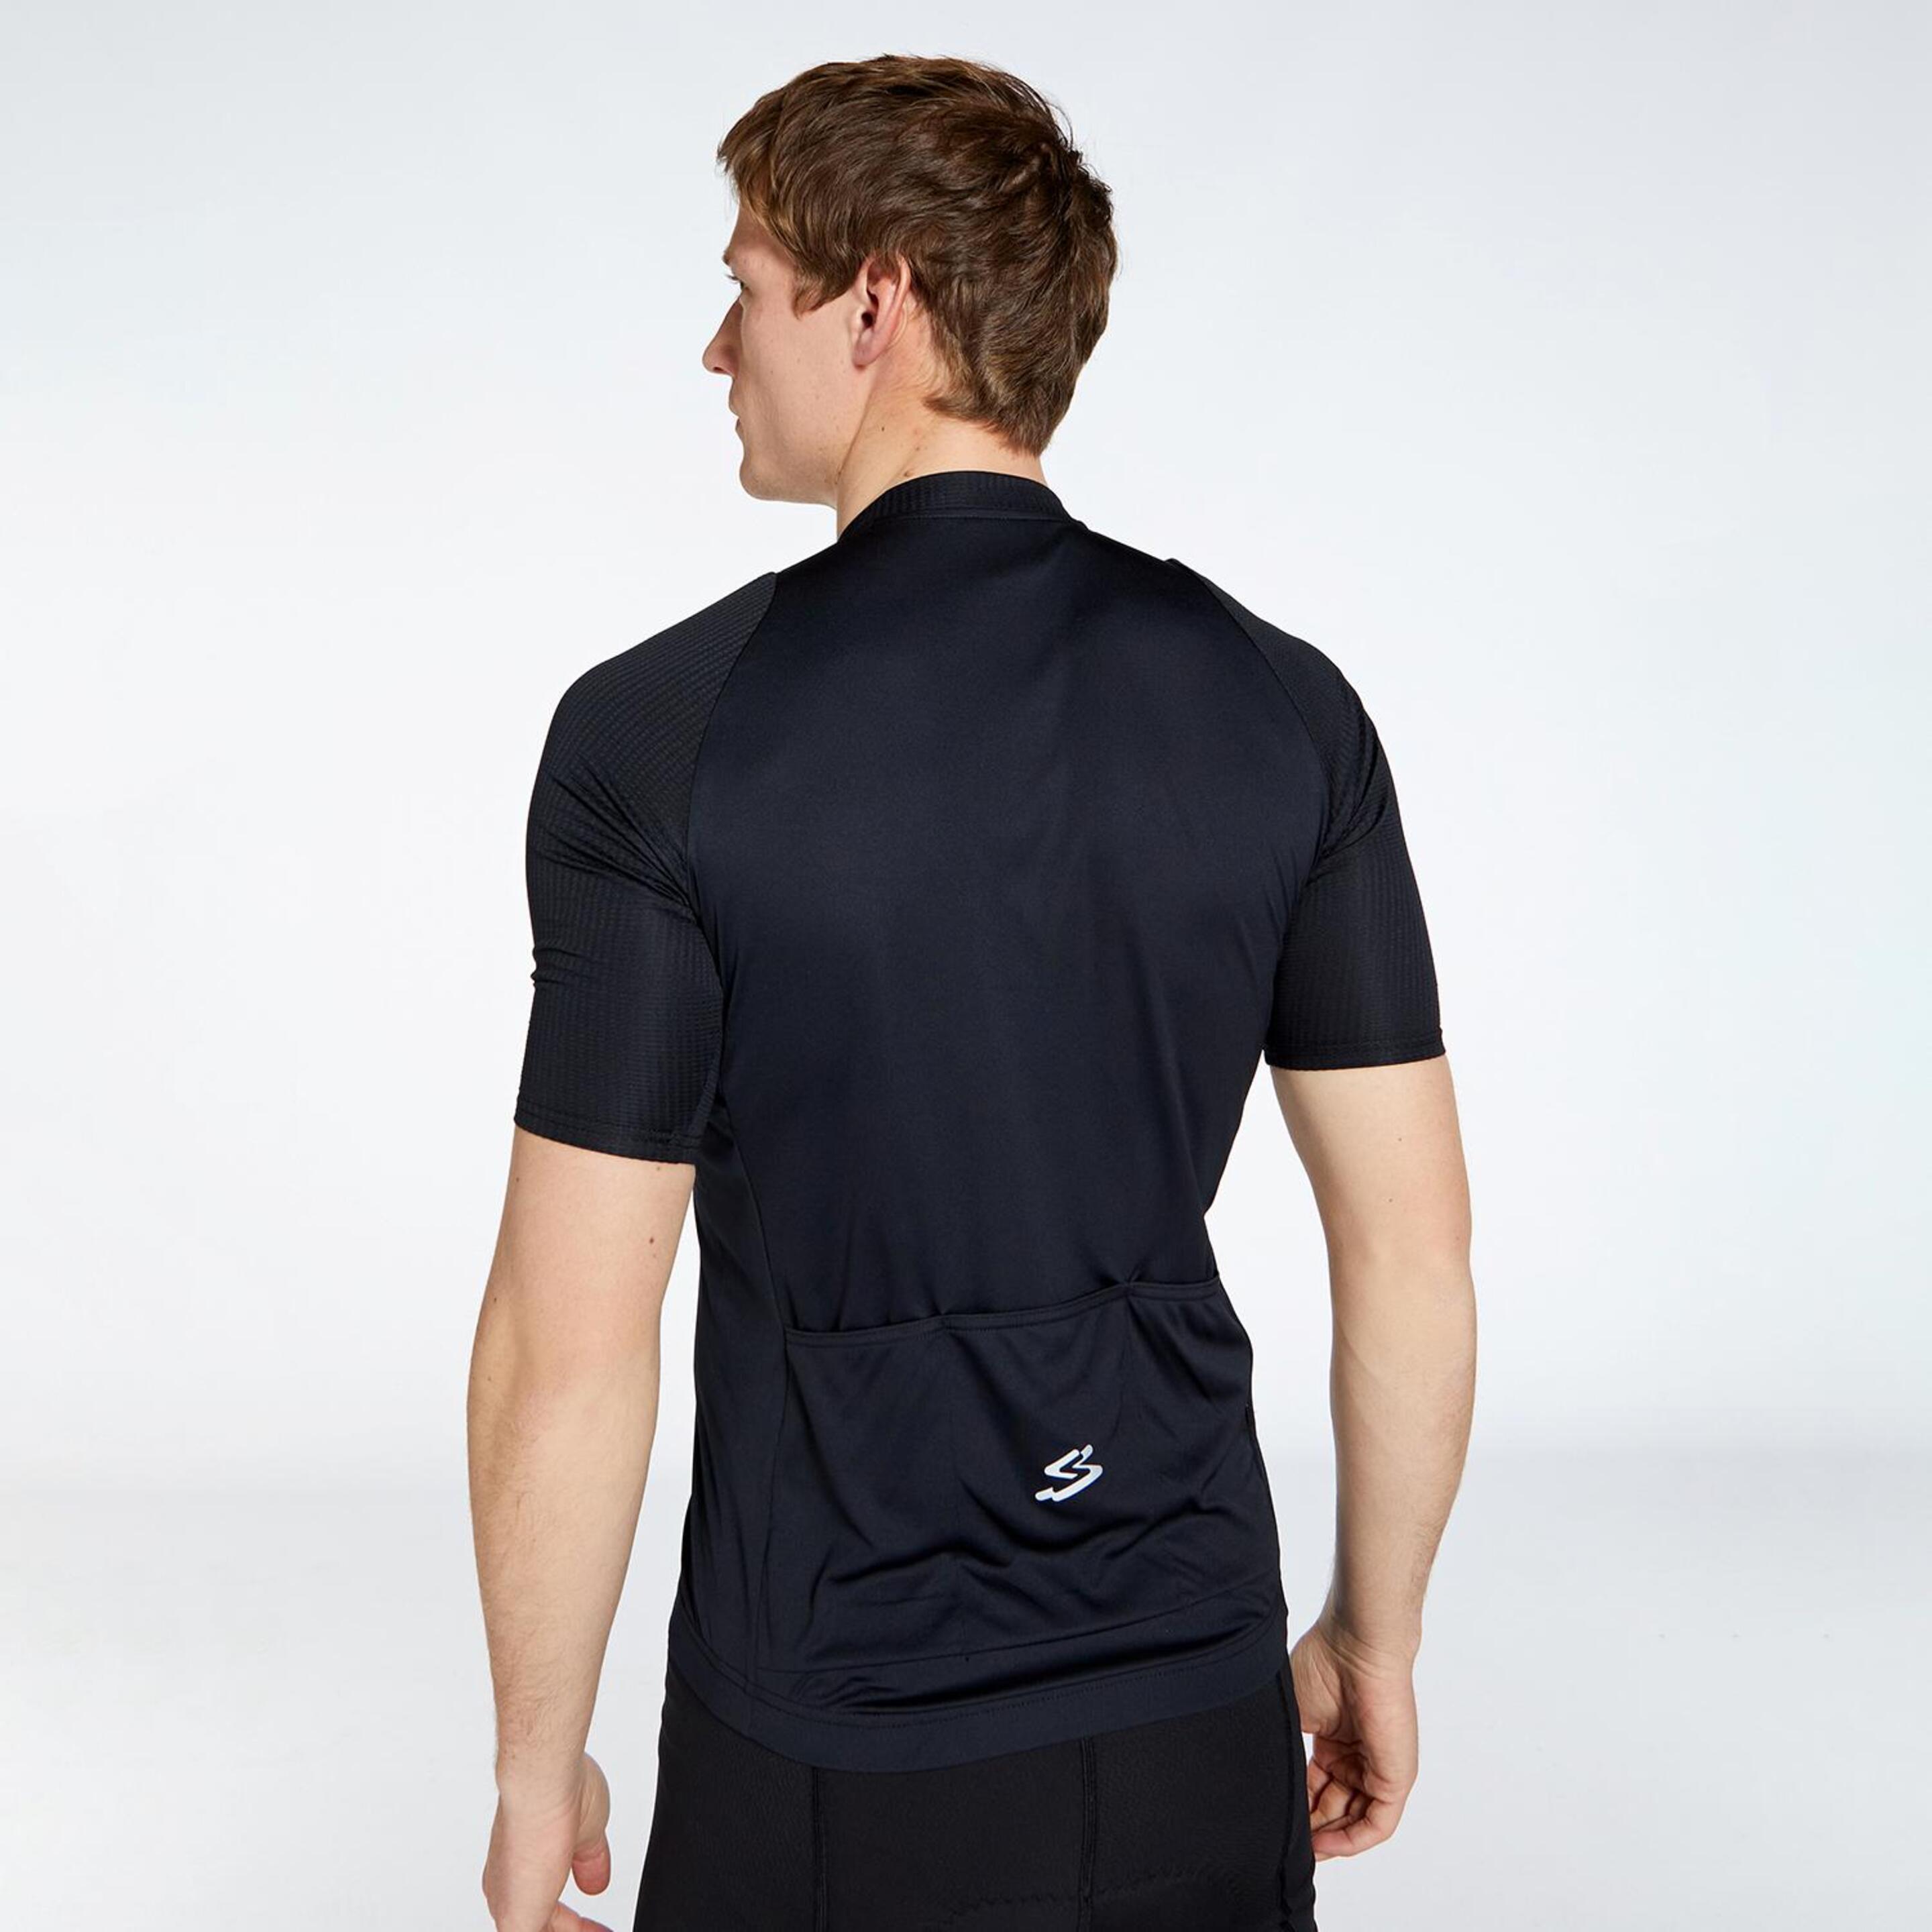 Spiuk Anatomic - Gris - Maillot Ciclismo Hombre